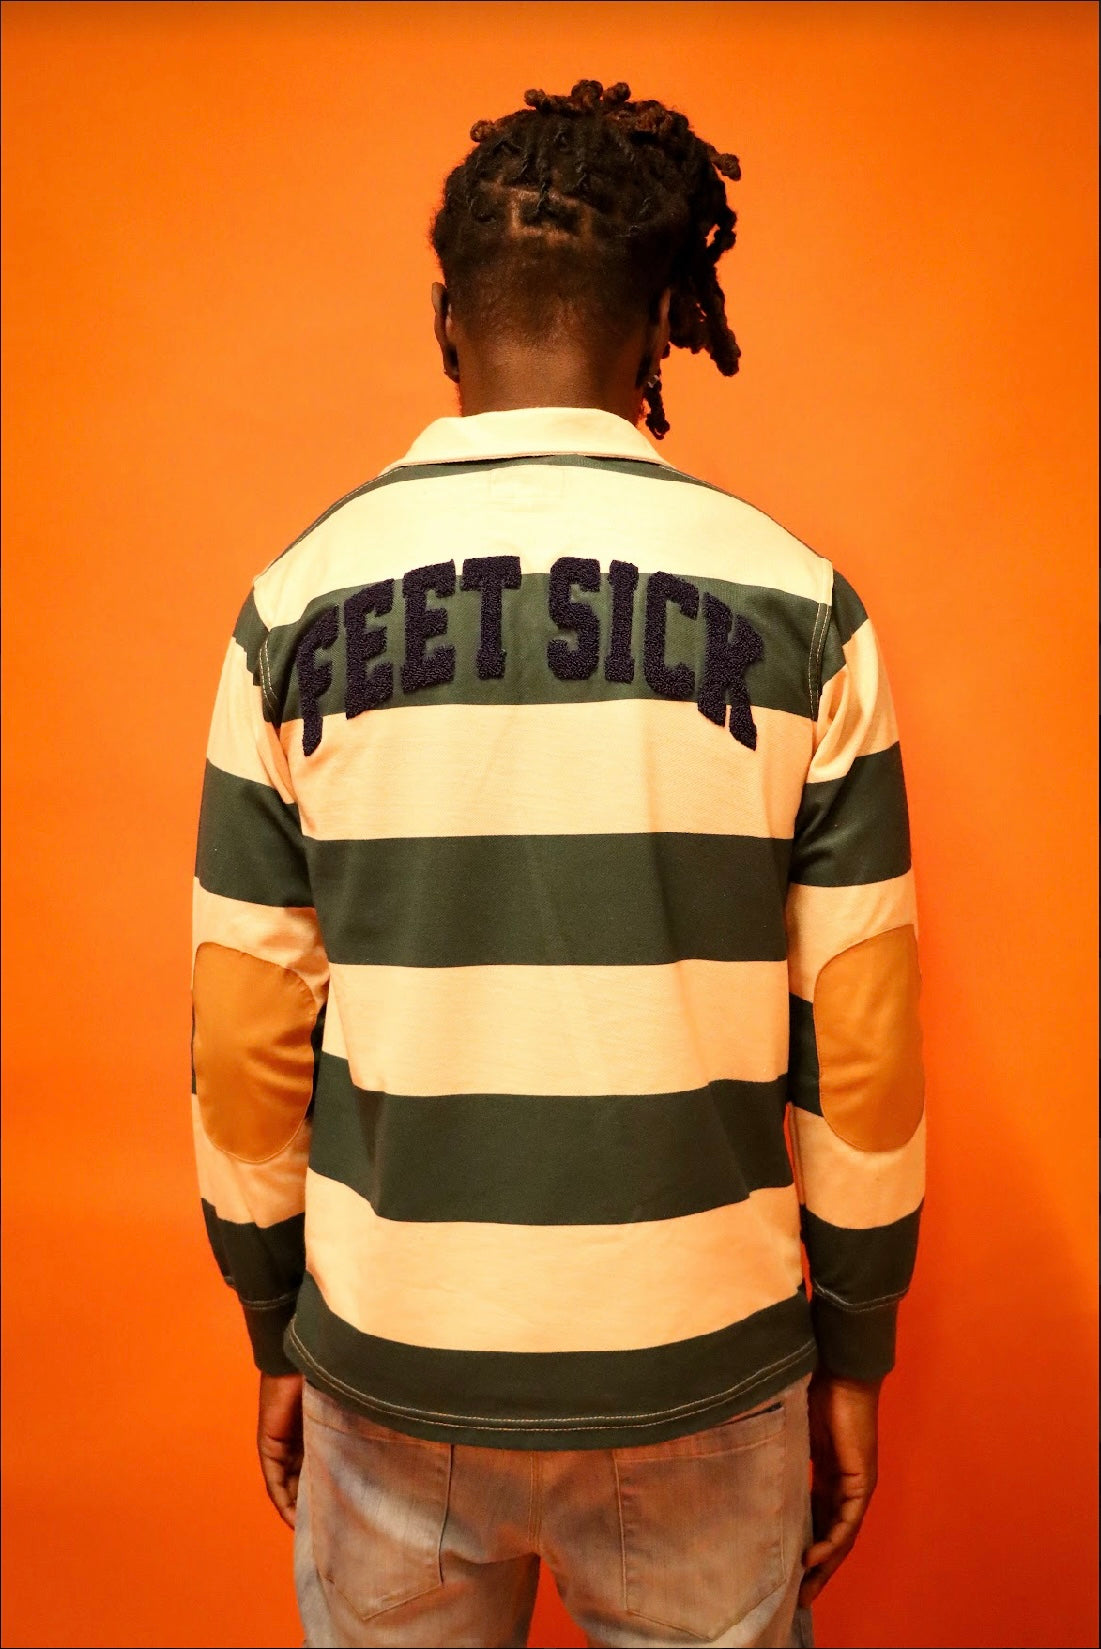 FEET SICK TAN AND GREEN STRIPED LONG SLEEVE RUGBY SHIRT